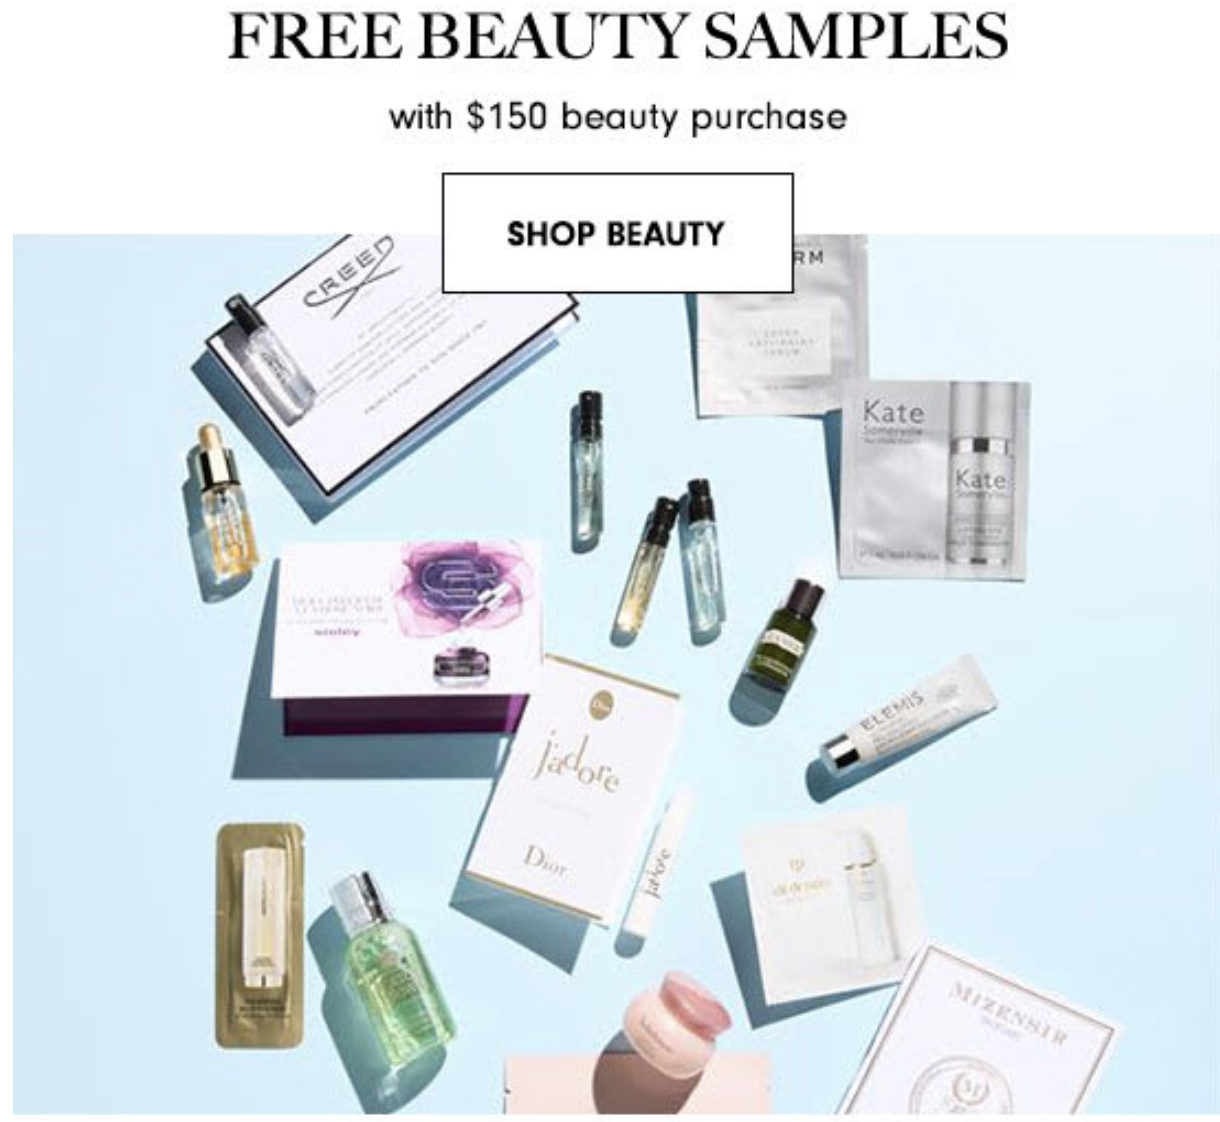 Neiman Marcus Beauty Samples, Yours with any $150 Beauty Purchase